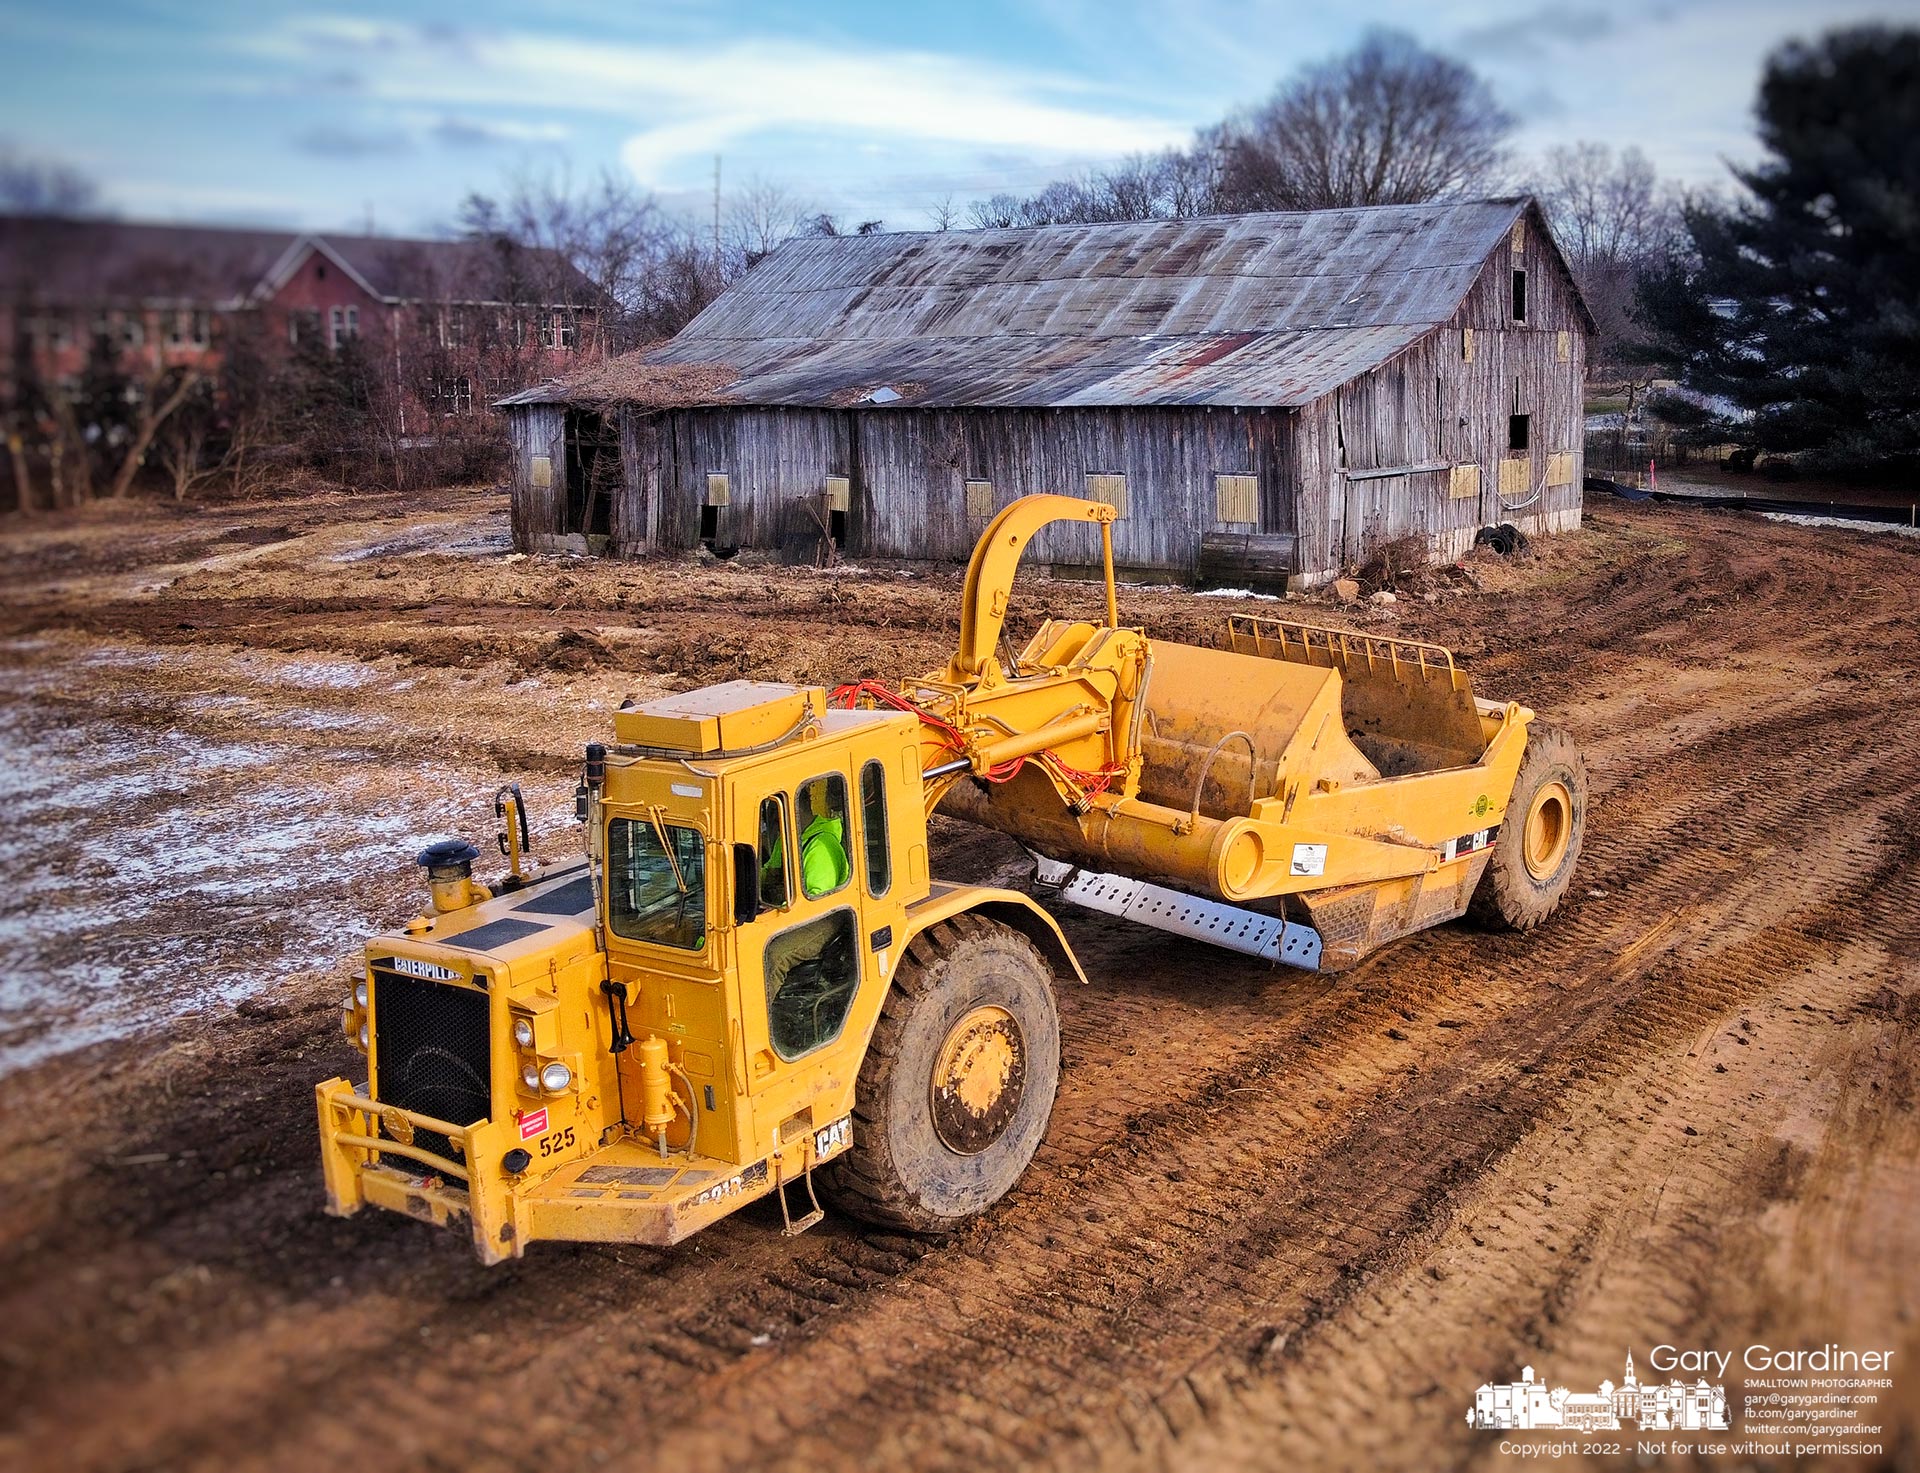 An earthmover travels past the abandoned and empty barn of a former farm on Africa Road where developers are building townhomes on the land including where the barn will soon be demolished. My Final Photo for December 19, 2022.